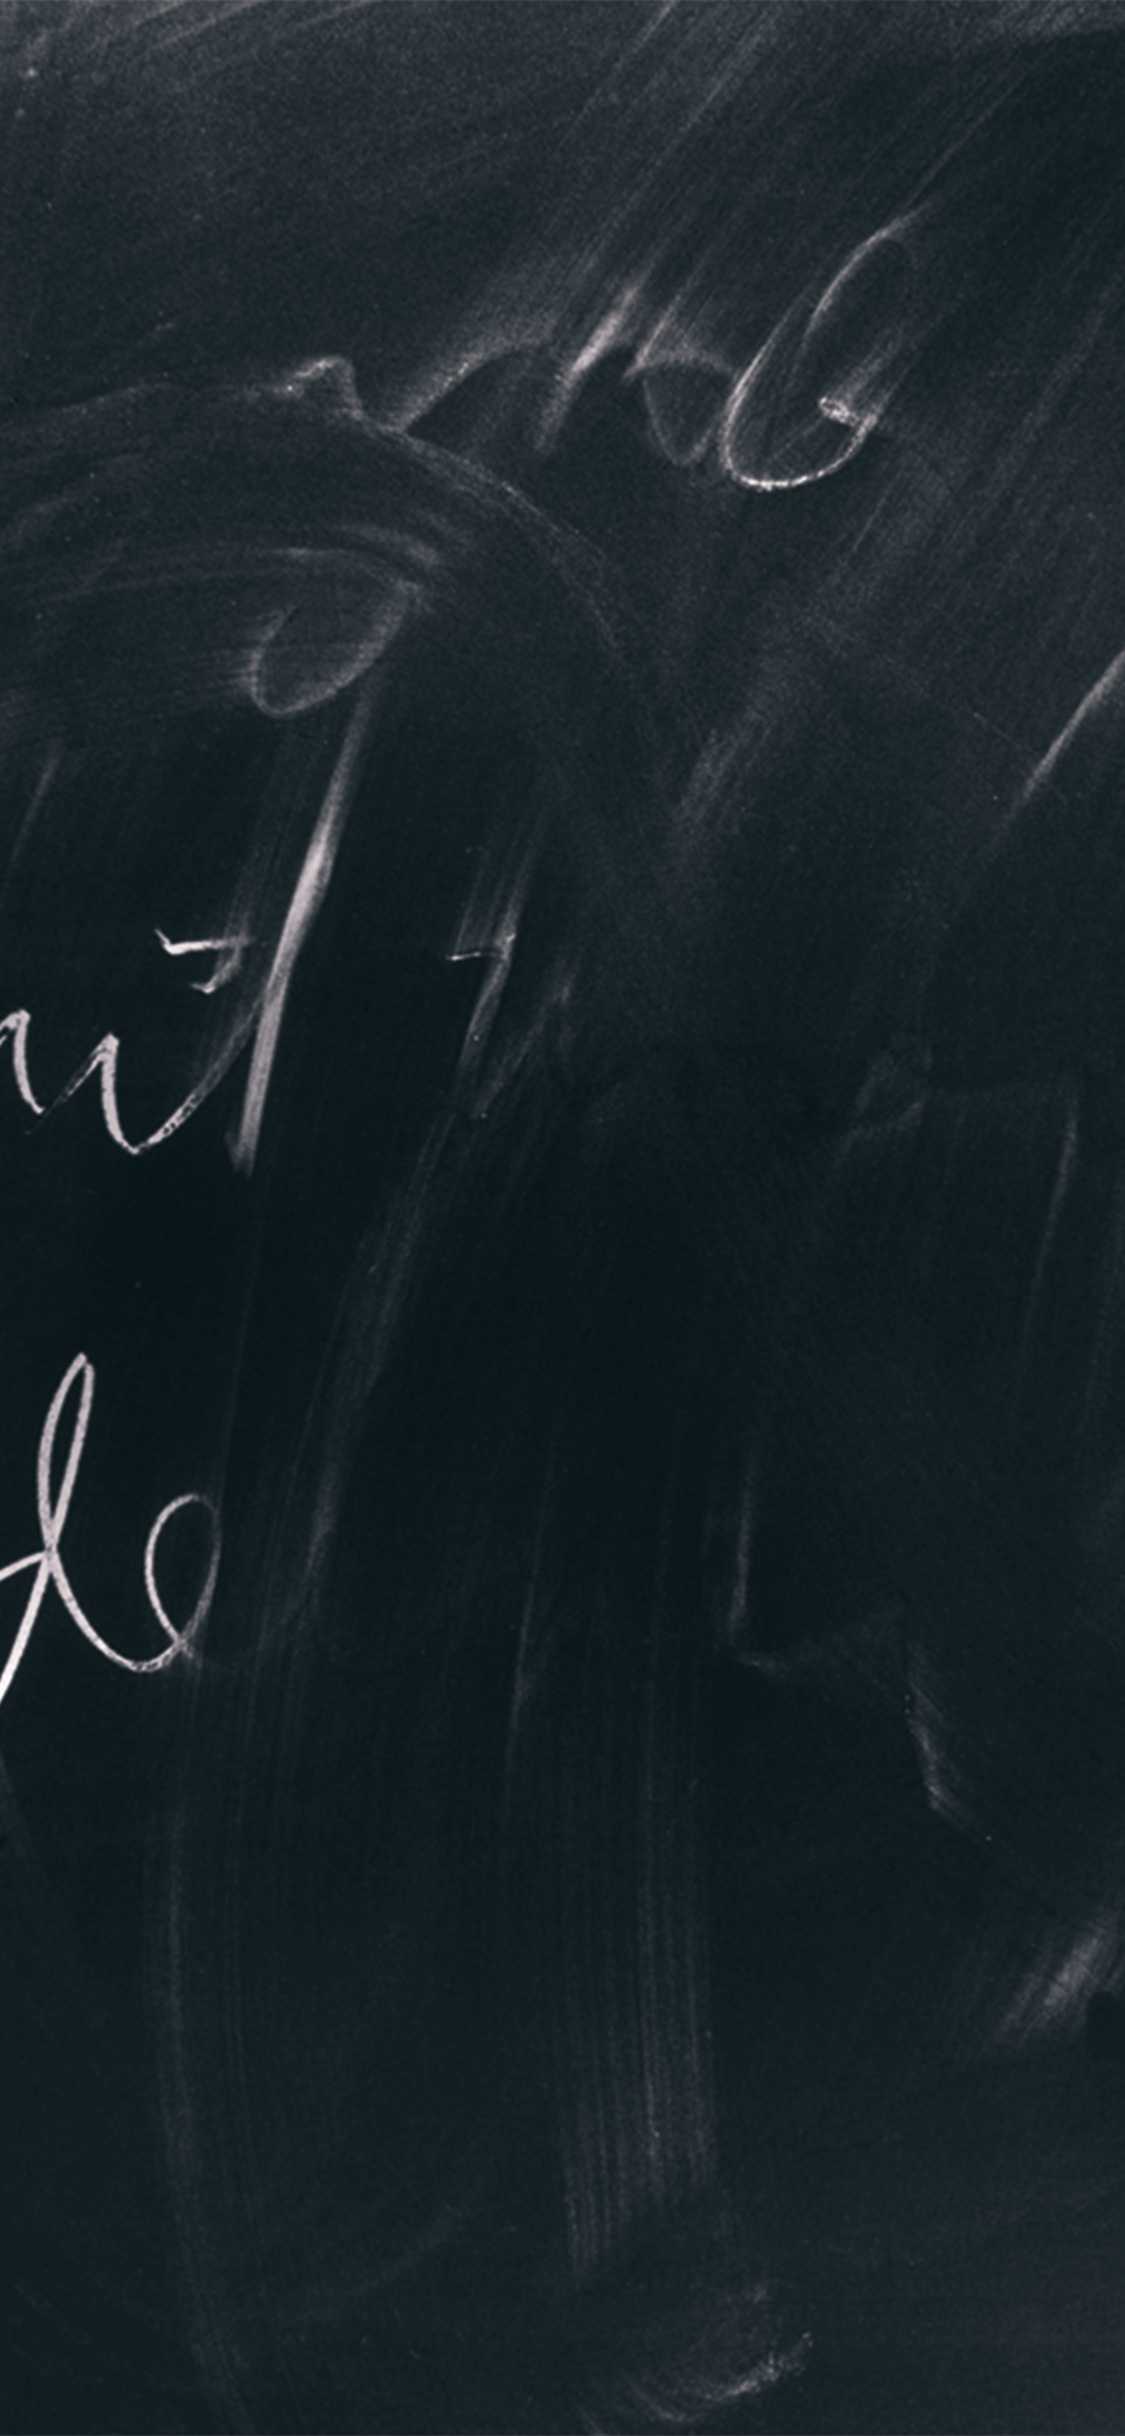 Chalkboard Wallpaper Android 1